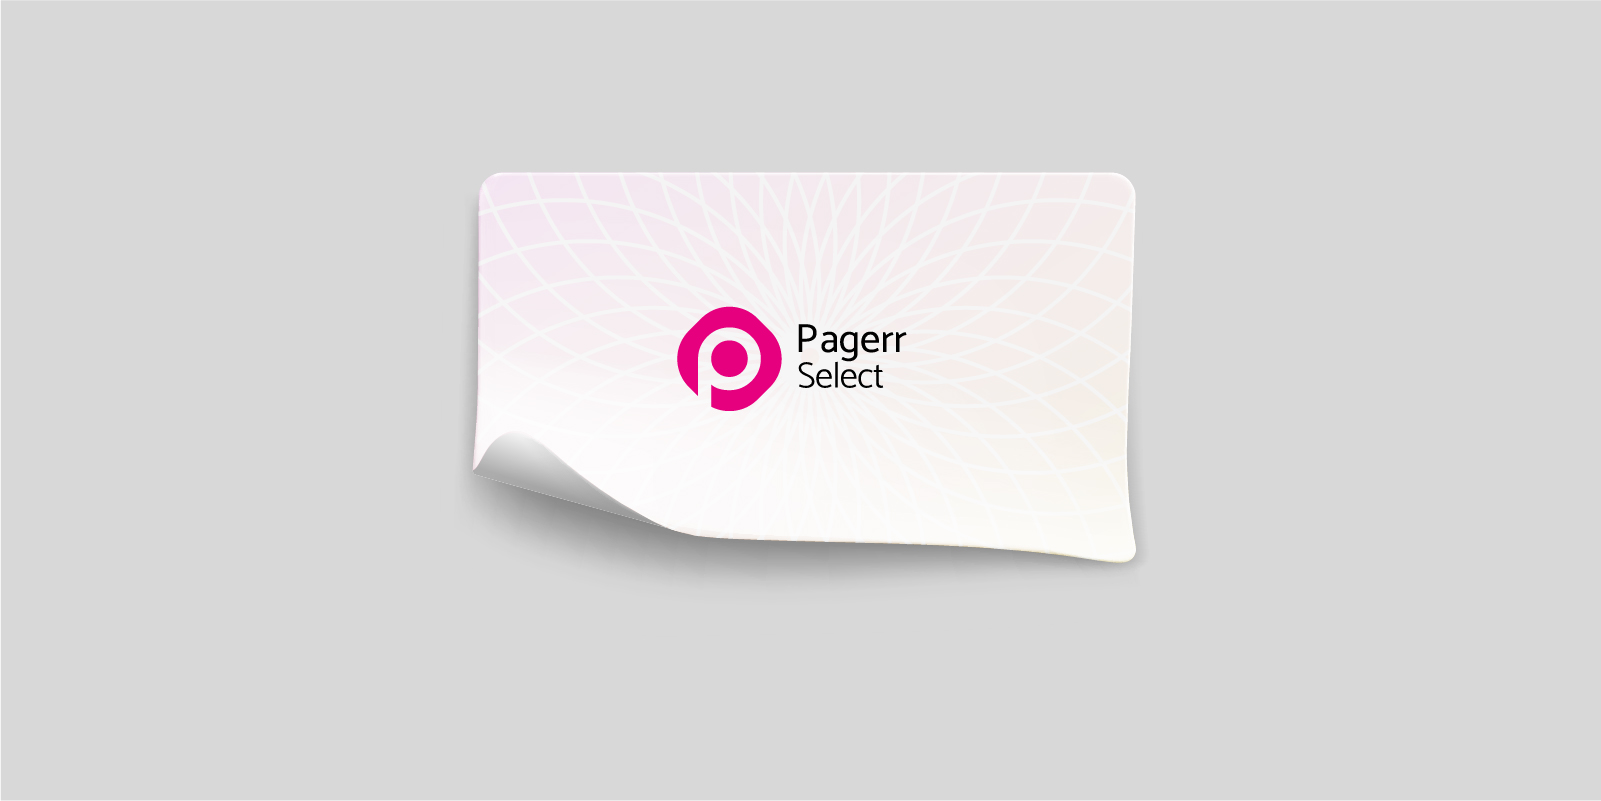 Sheet stickers in Darwin - Print with Pagerr